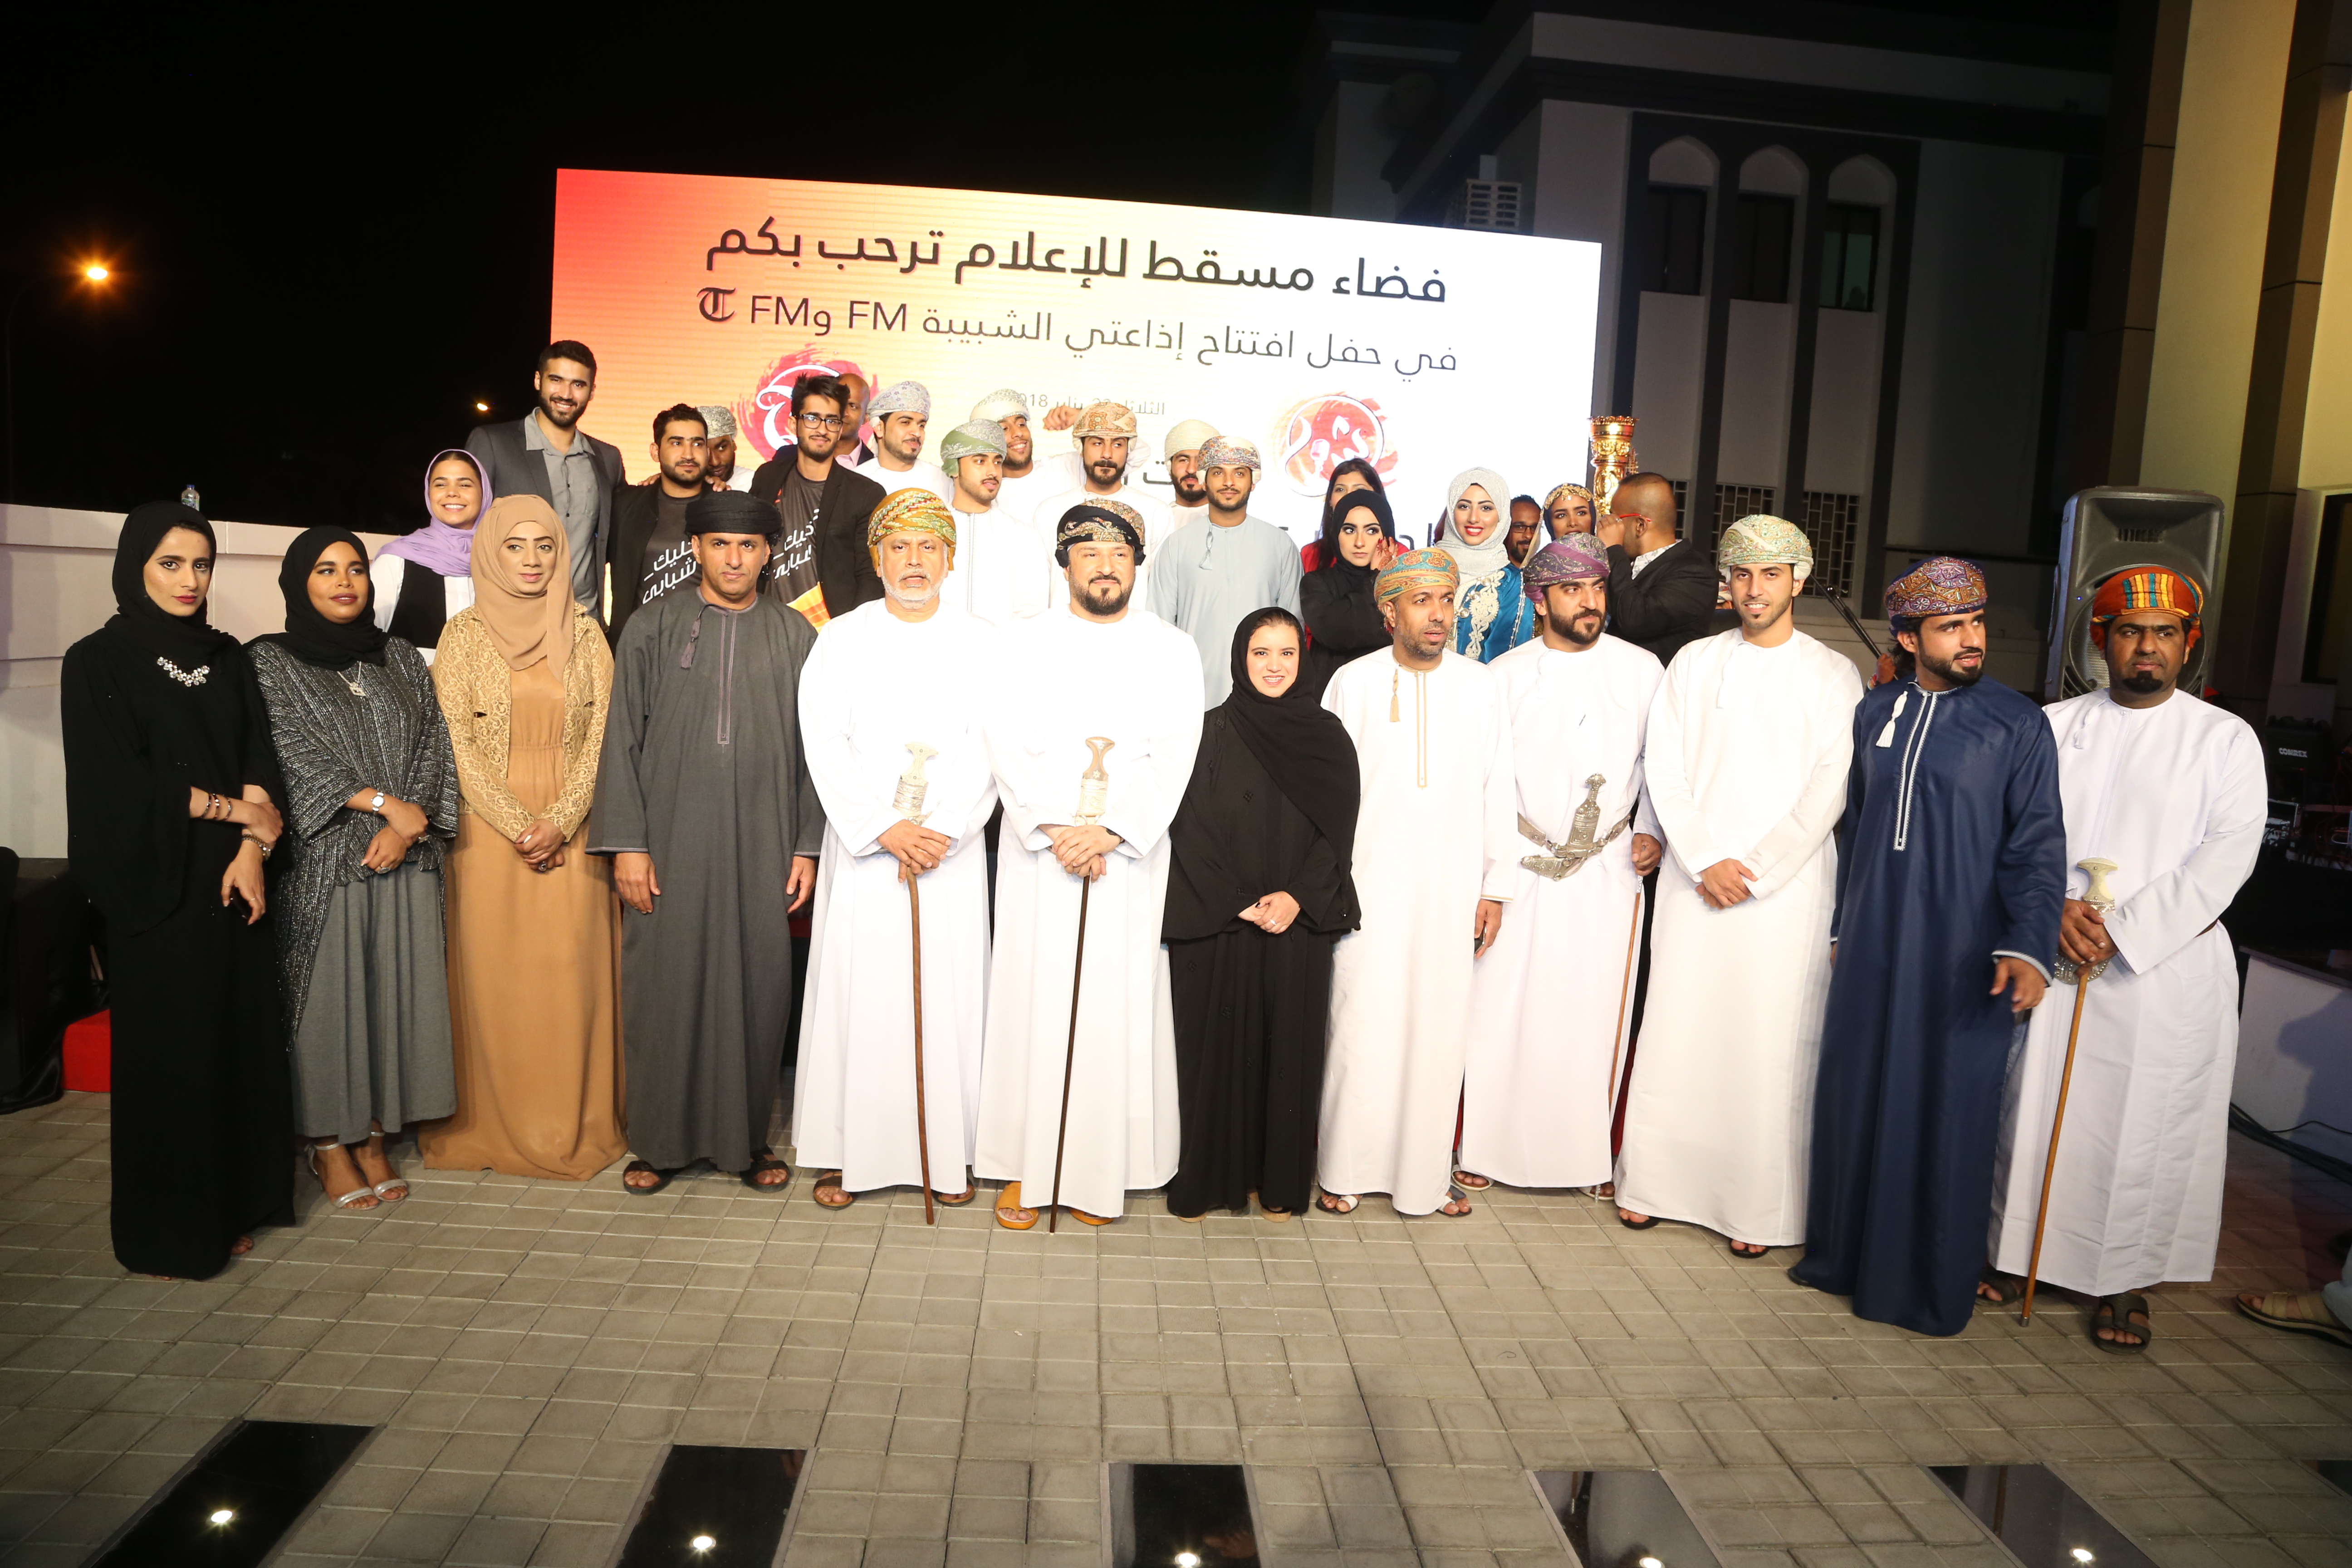 In pictures: Launch of T FM Radio by Oman’s Minister of Information